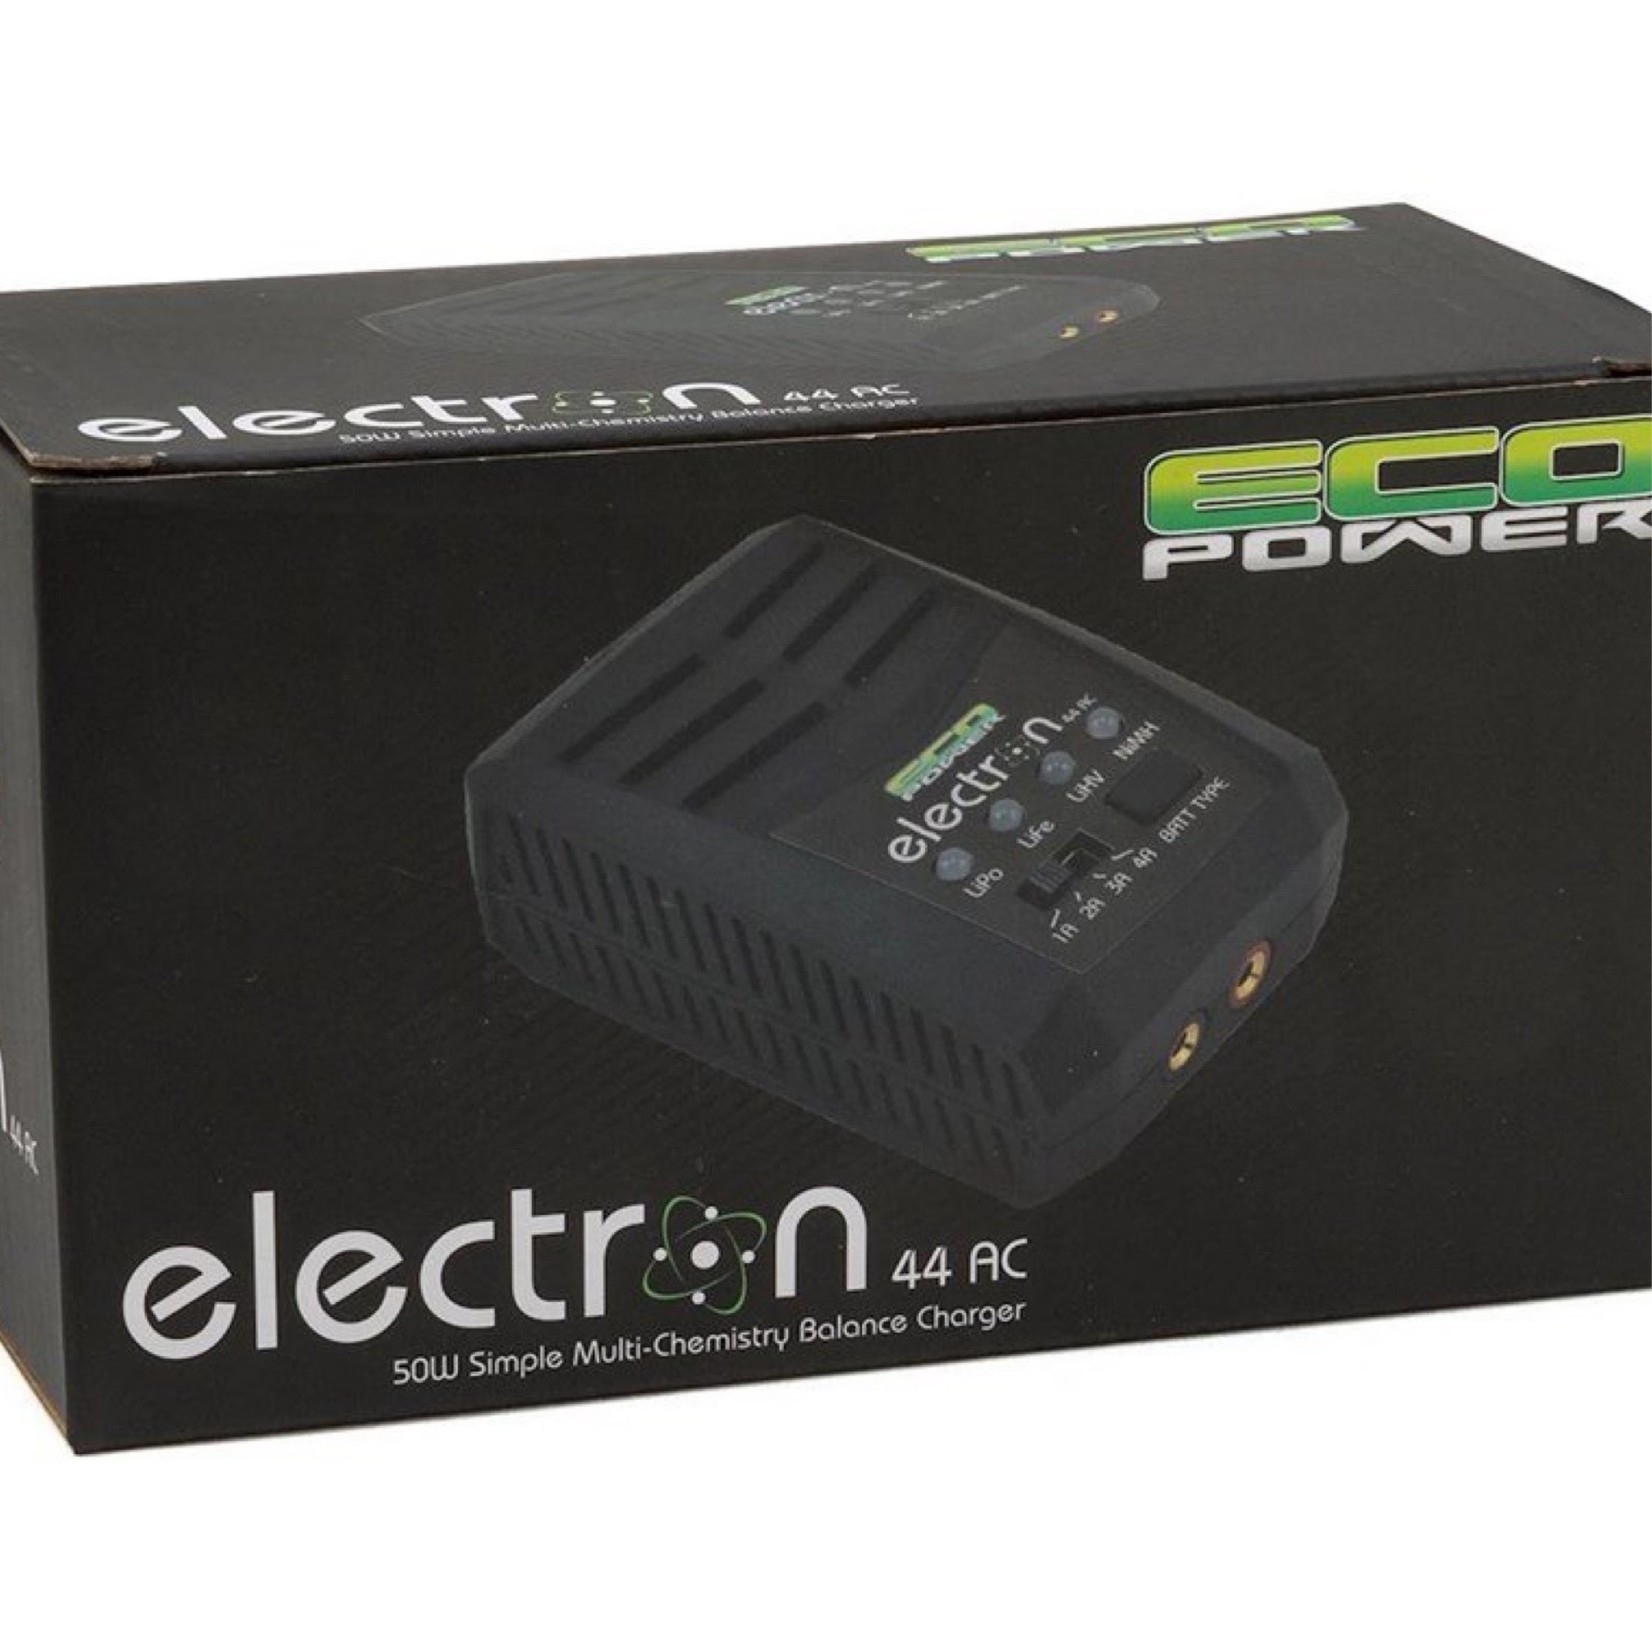 EcoPower EcoPower "Electron 44 AC" LiHV/LiPo/LiFe Battery Charger (2-4S/4A/50W) #ECP-1006